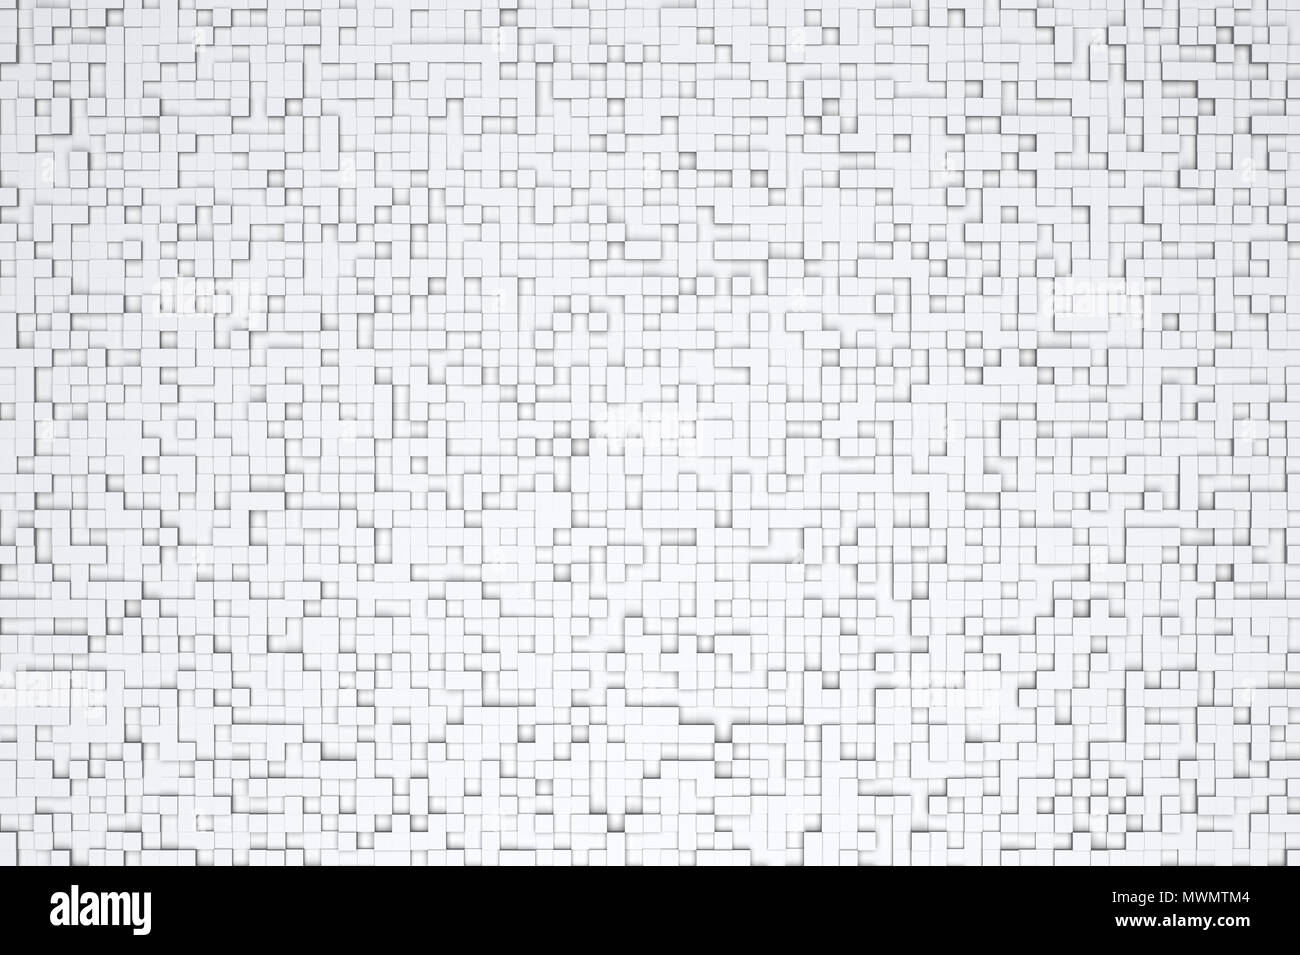 Abstract White or Gray 3d Geometric Small Cube Tiles Background Design Pattern Stock Photo